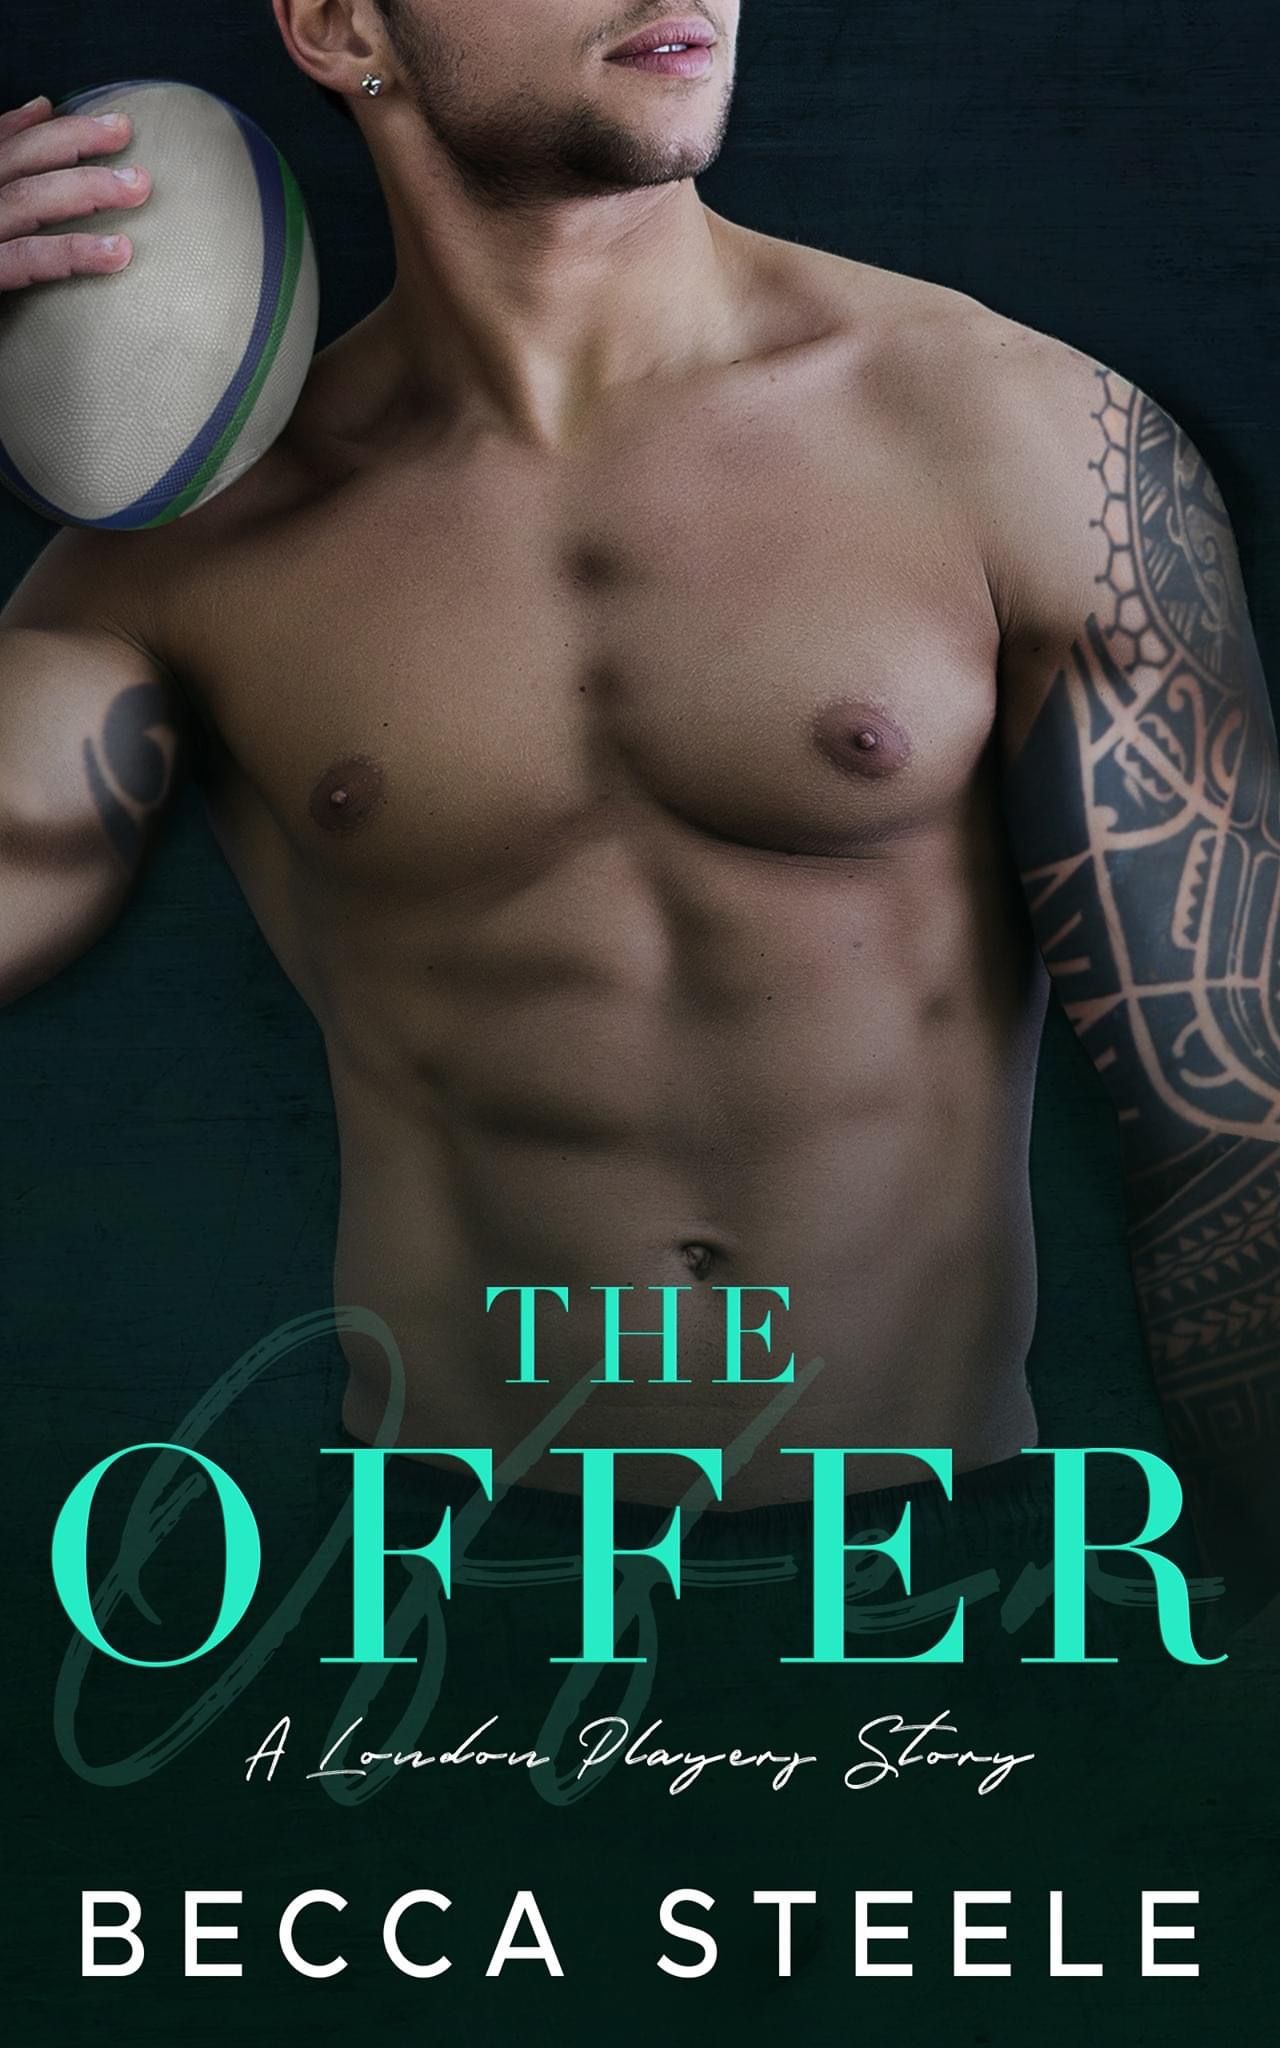 The Offer book cover by Becca Steele